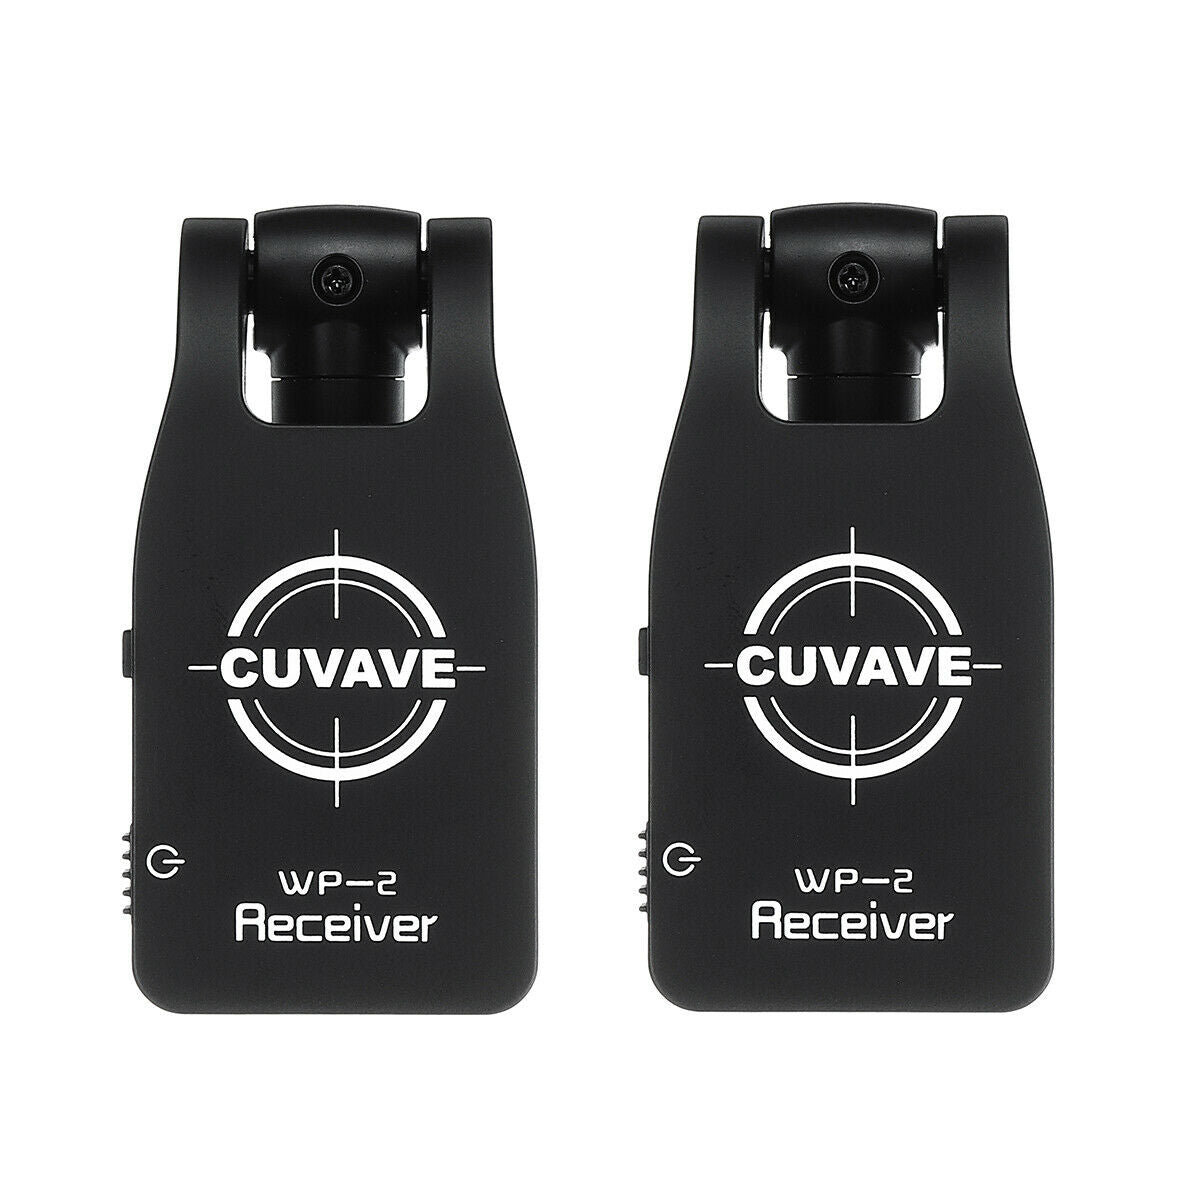 CUVAVE WP-2 Enhanced 2.4G Guitar Wireless System Transmitter and Receiver